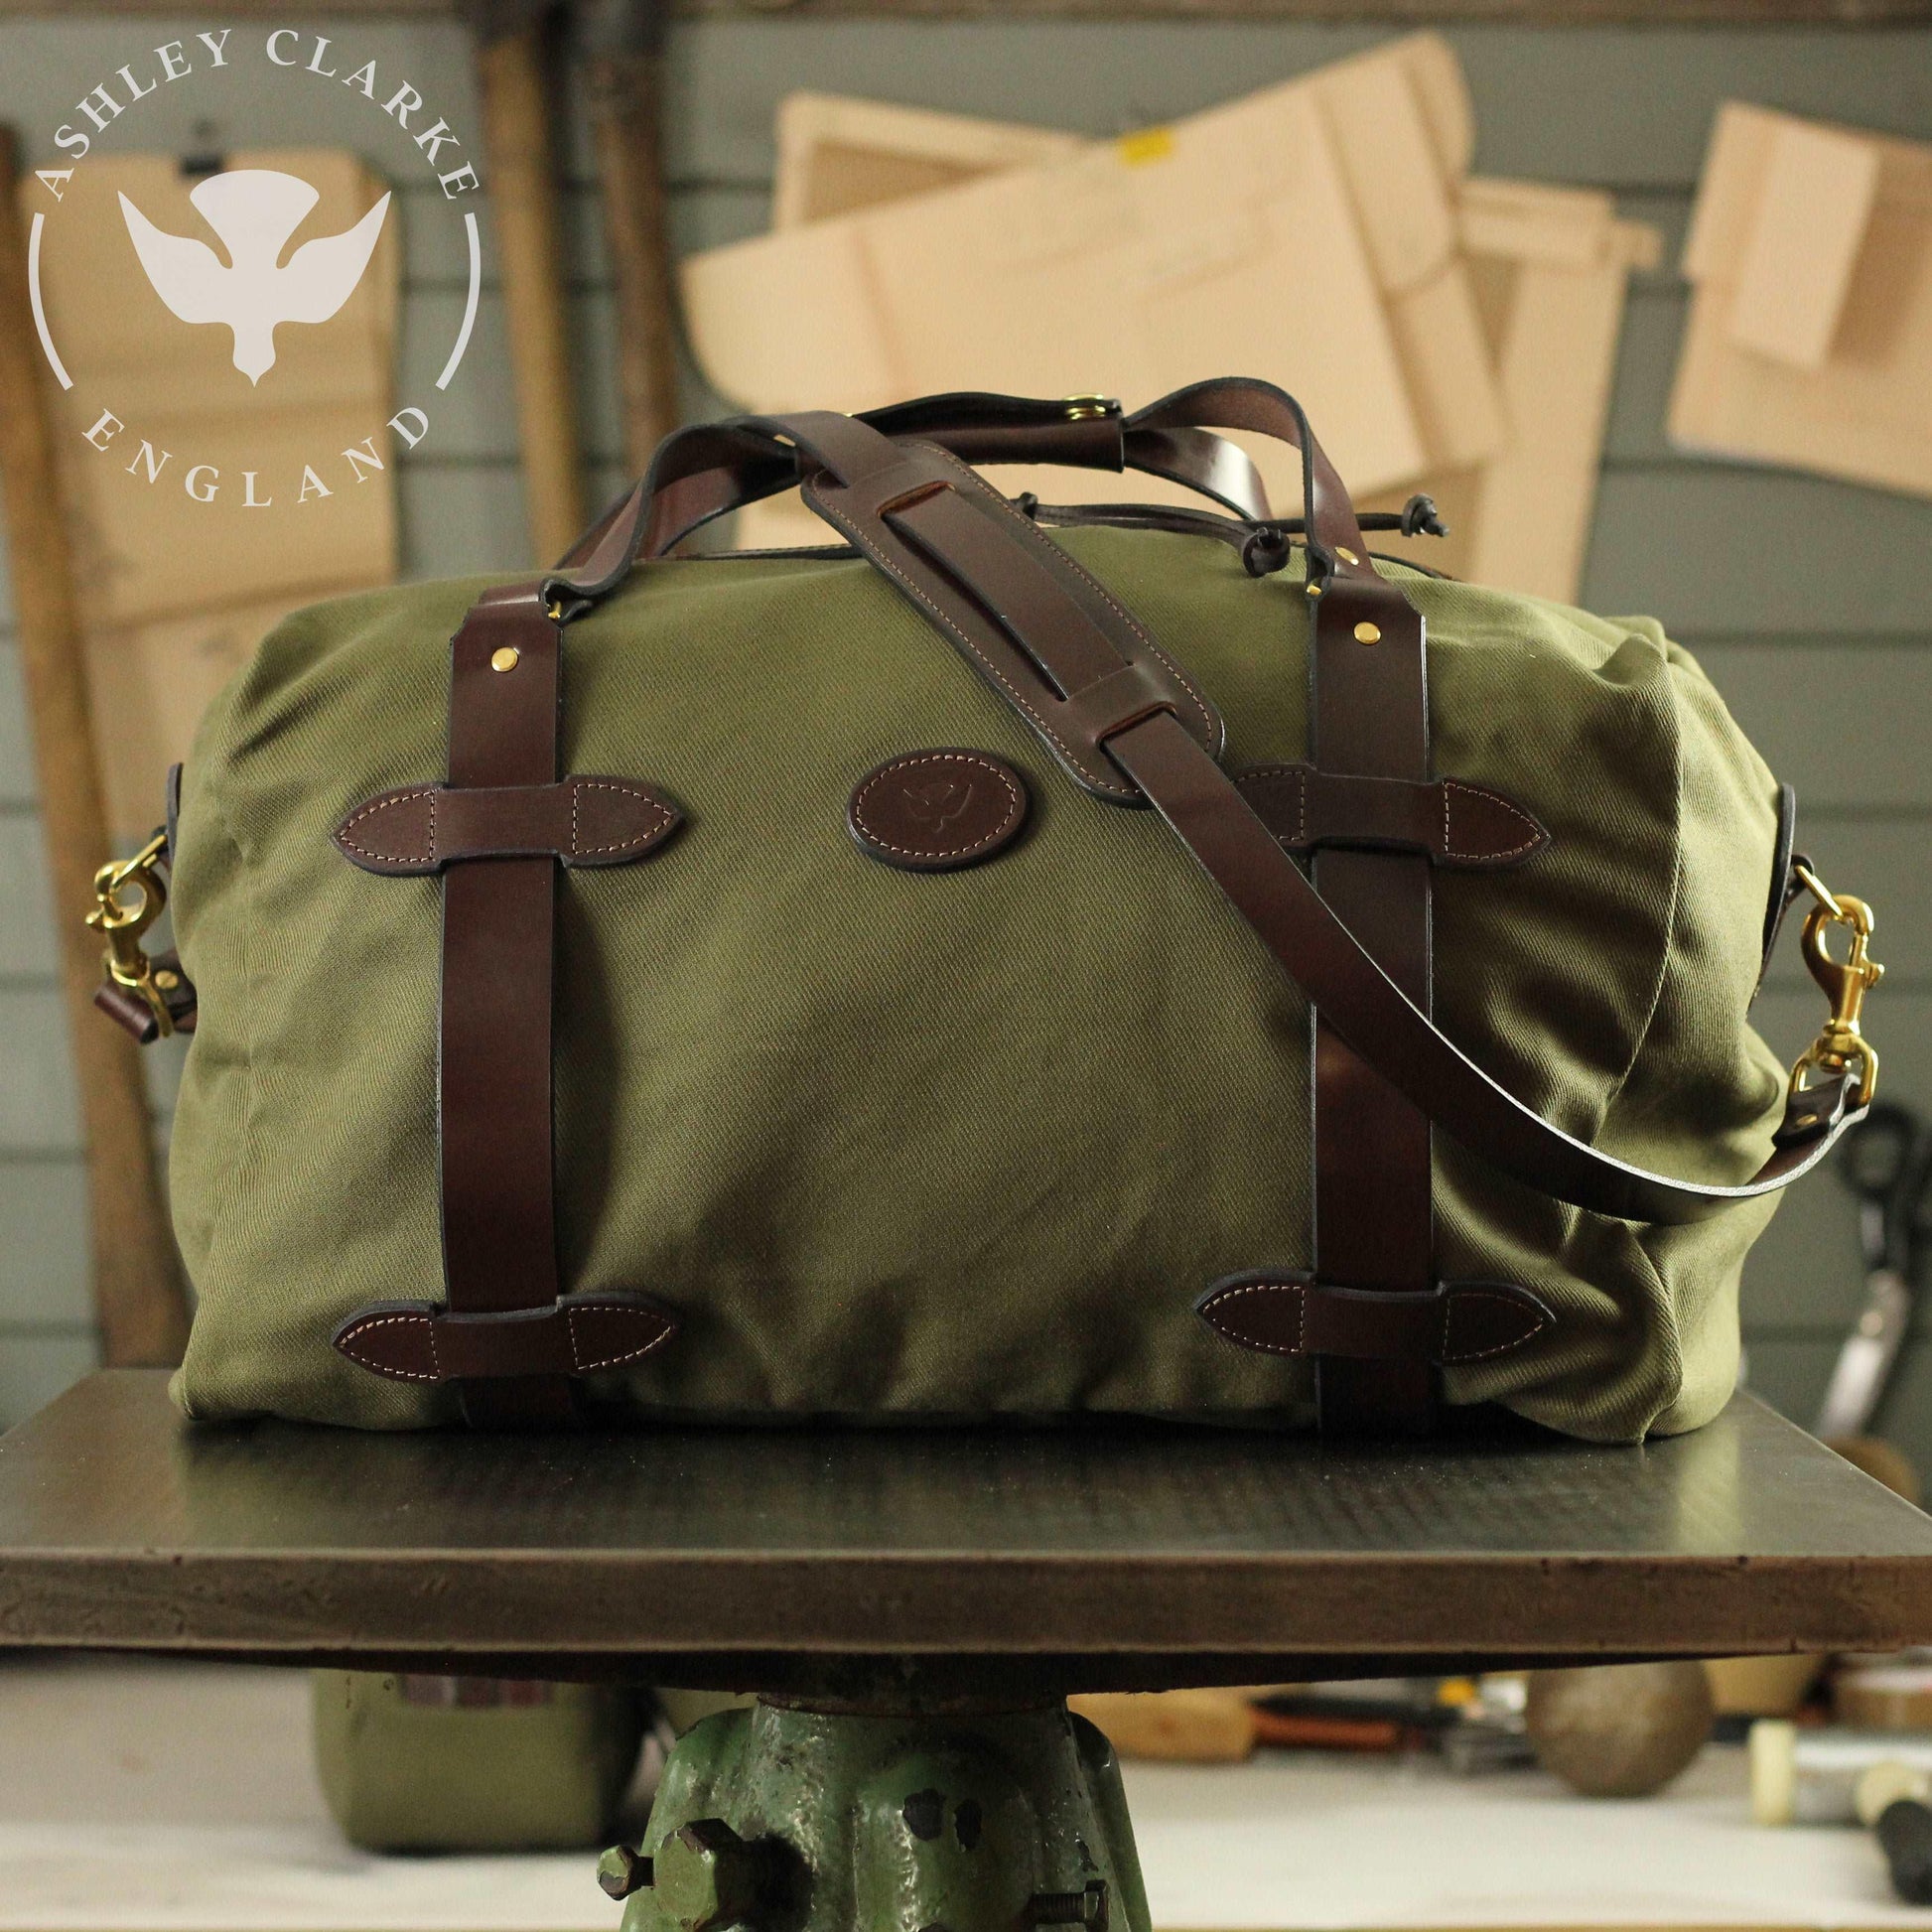 a green waxed canvas holdall bag by ashley clarke england on top of a table 2